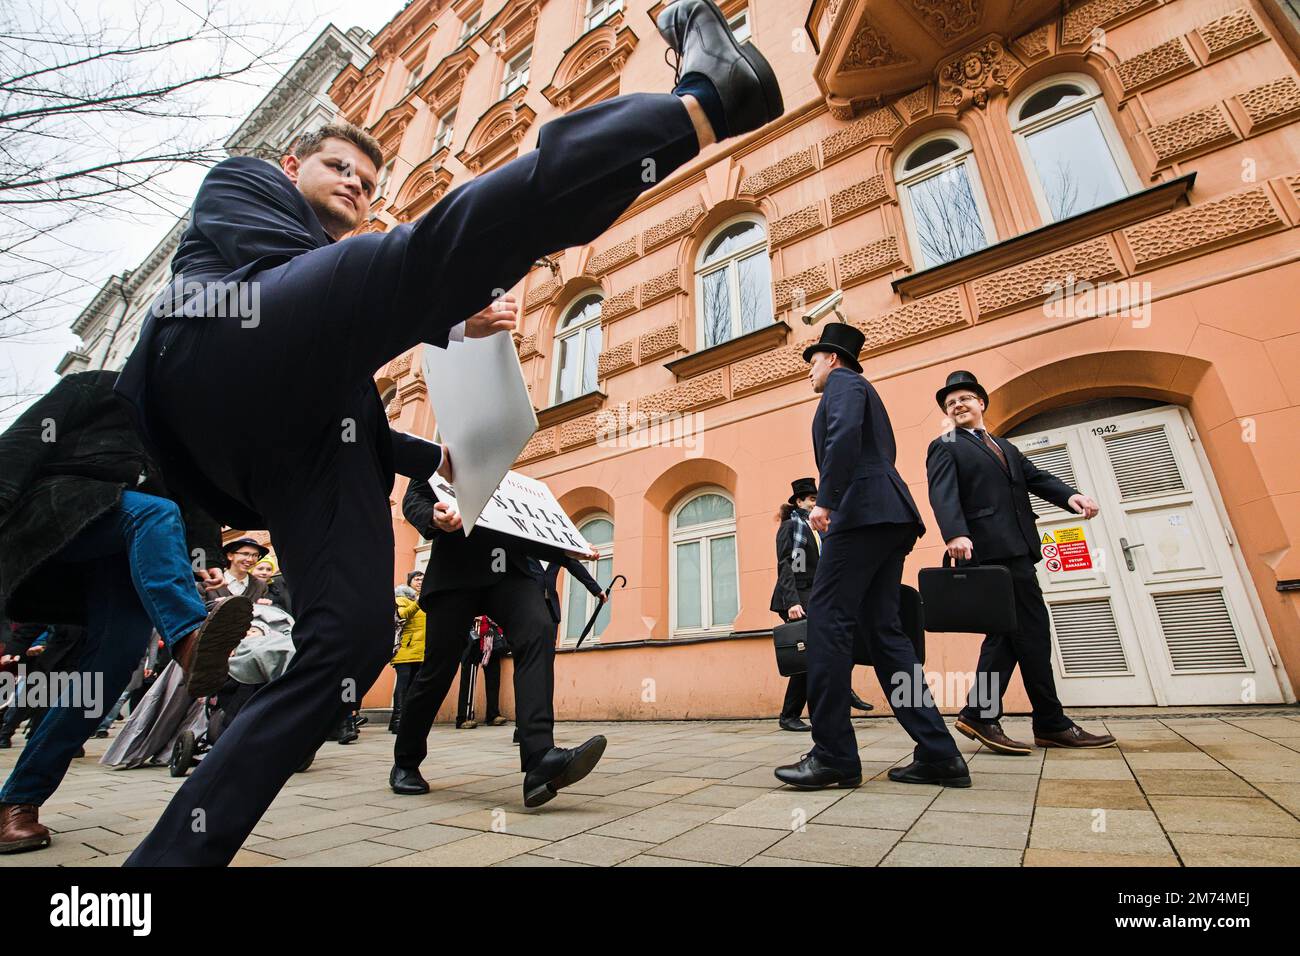 Tenth mock event called 'Silly Walks through Brno' on the occasion of International Silly Walk Day inspired by British comedy troupe Monty Python. Participants meet outside Supreme Administrative Court at Justice statue in Brno, Czech Republic, January 7, 2023. (CTK Photo/Patrik Uhlir) Stock Photo